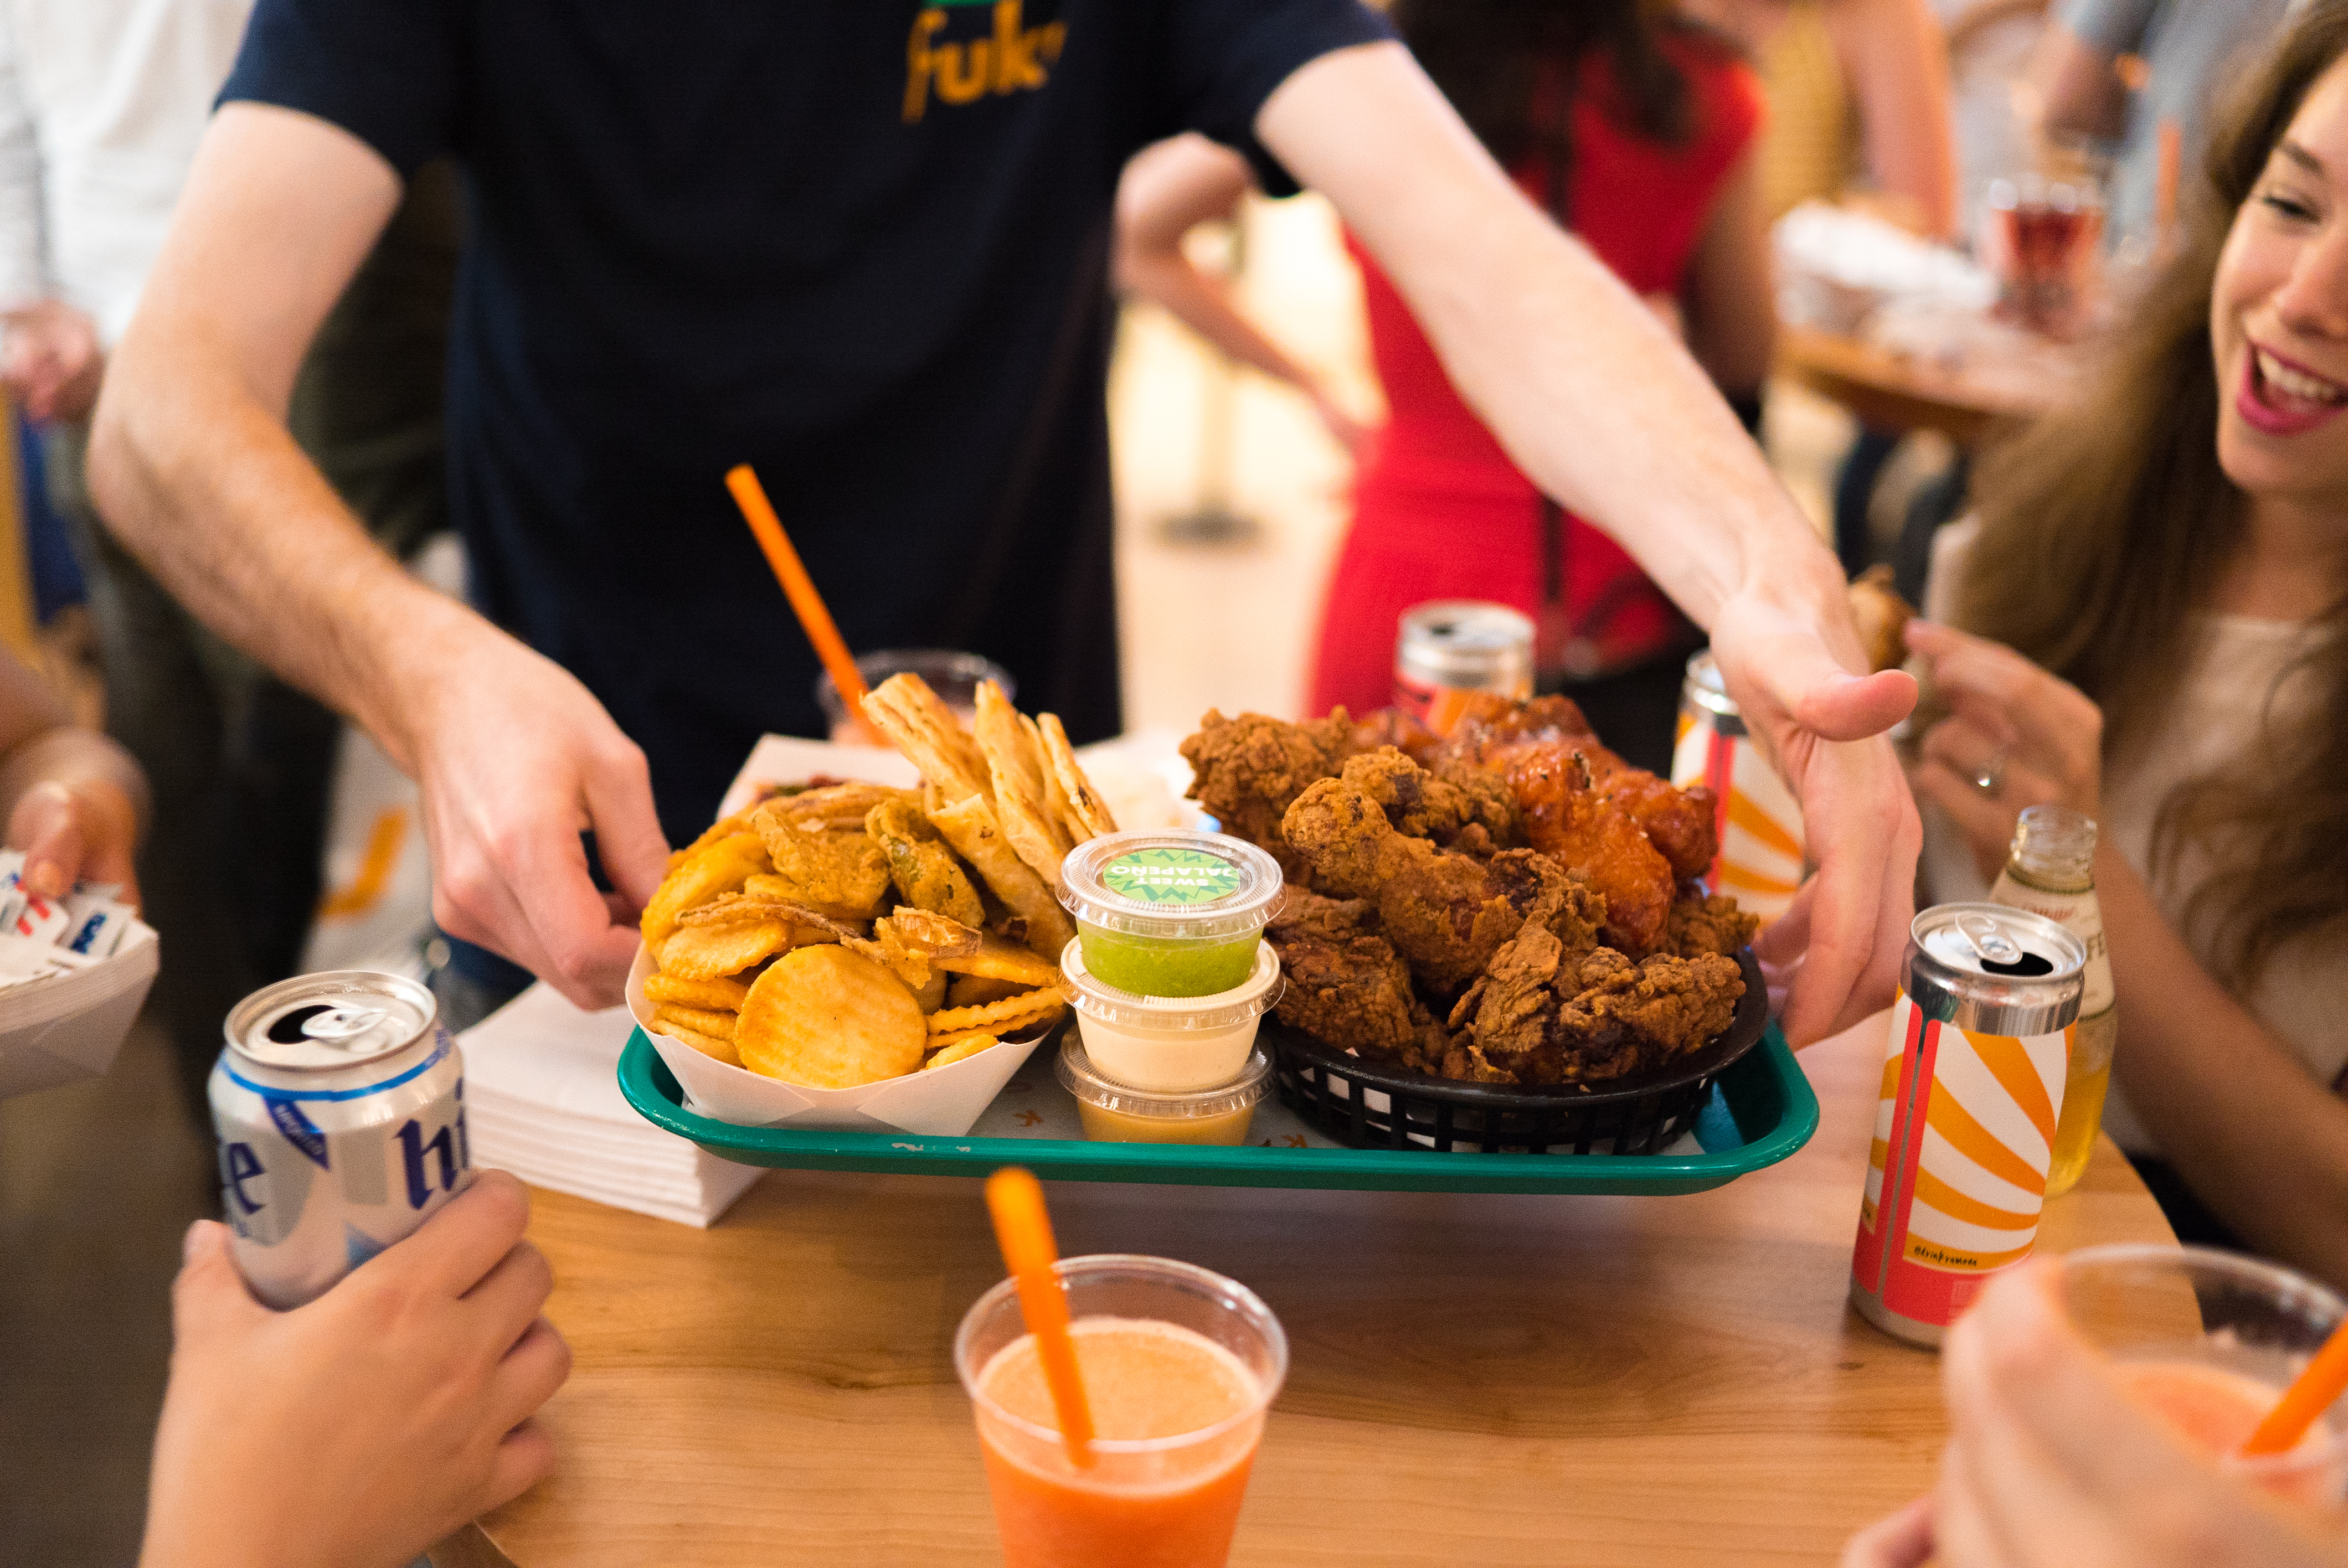 An employee at a restaurant carries a tray with fried chicken and sides.